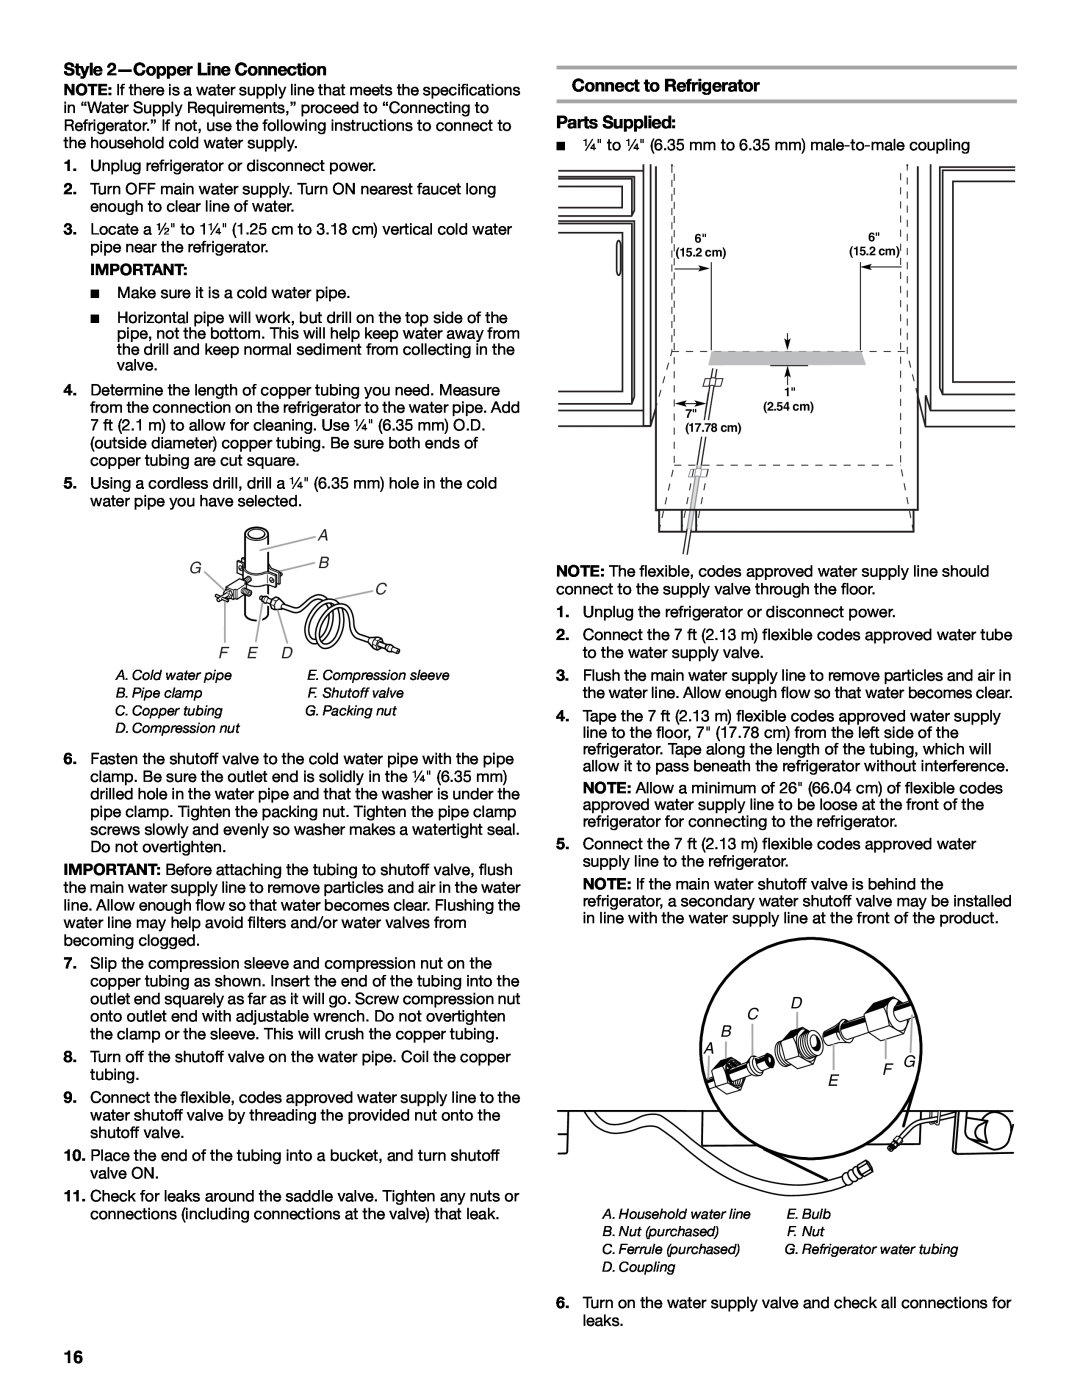 Jenn-Air W10379136B manual Style 2-CopperLine Connection, Parts Supplied, C B A, Connect to Refrigerator 